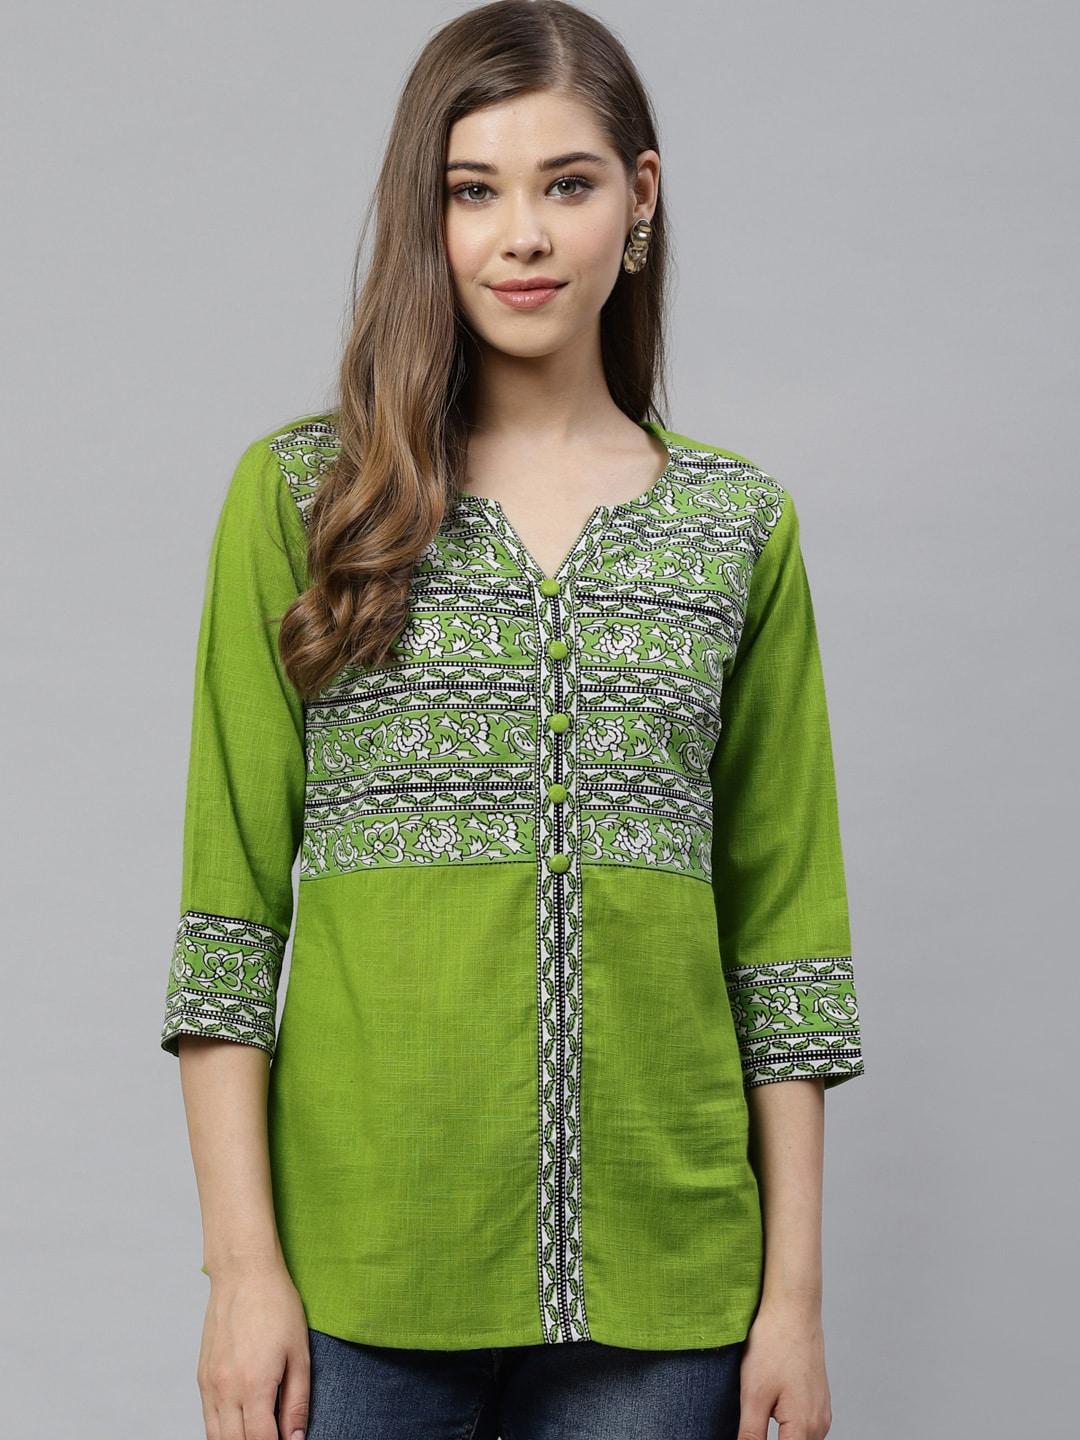 YASH GALLERY Women Green & Off-White Printed Top